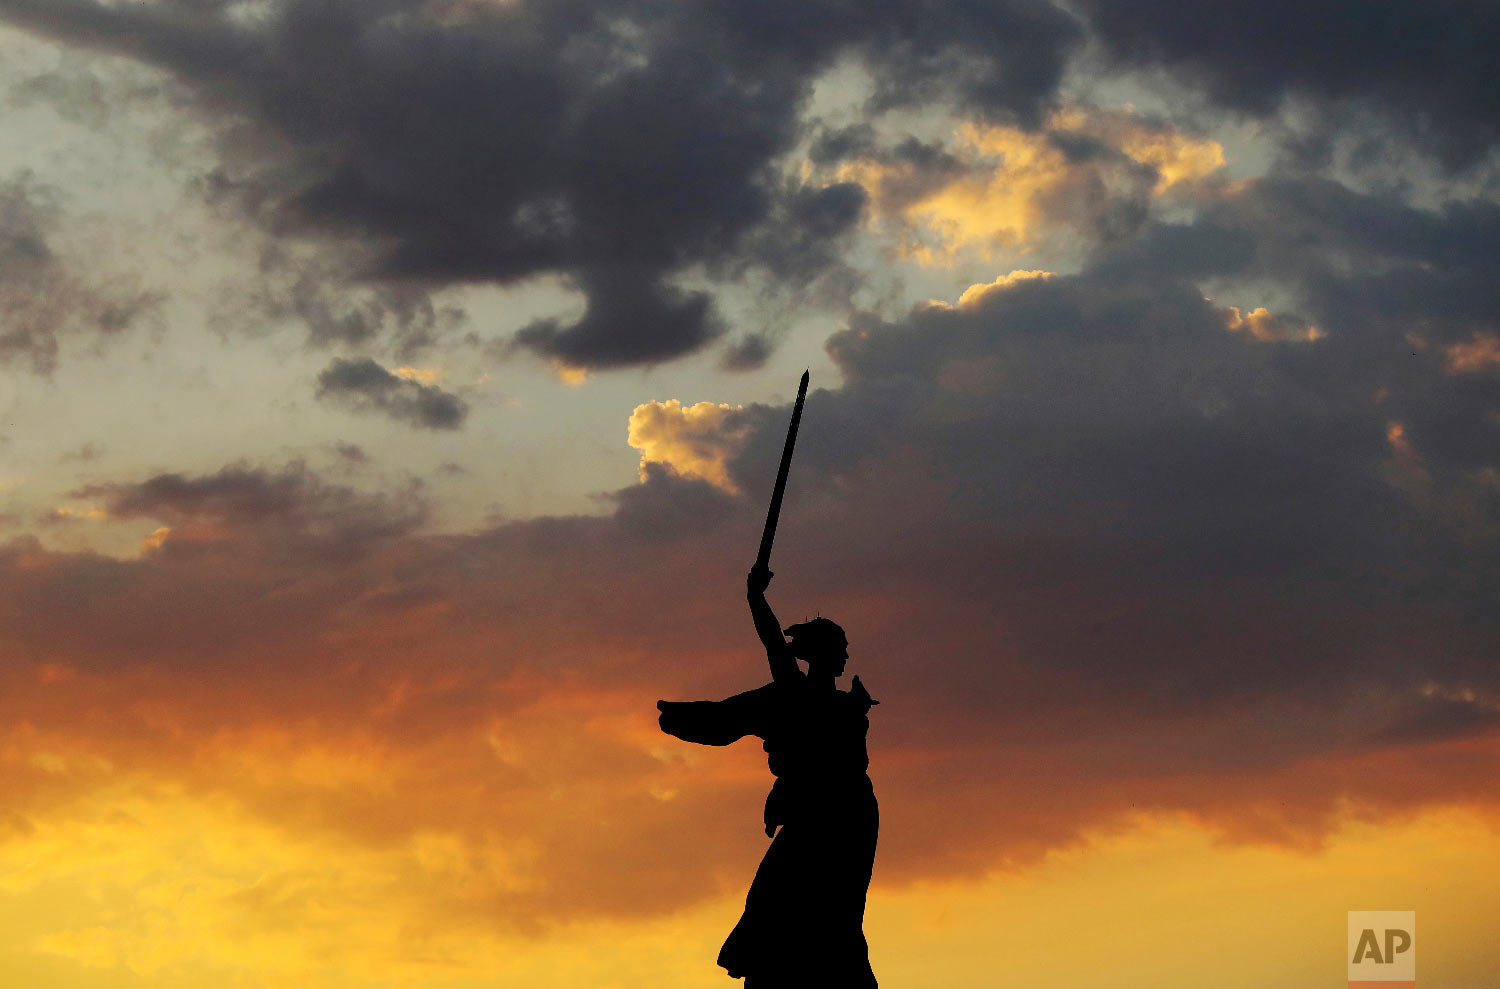  The sun sets over "The Motherland Calls" memorial during near the Volgograd Arena during the 2018 soccer World Cup in Volgograd, Russia on June 27, 2018. (AP Photo/Eugene Hoshiko) 